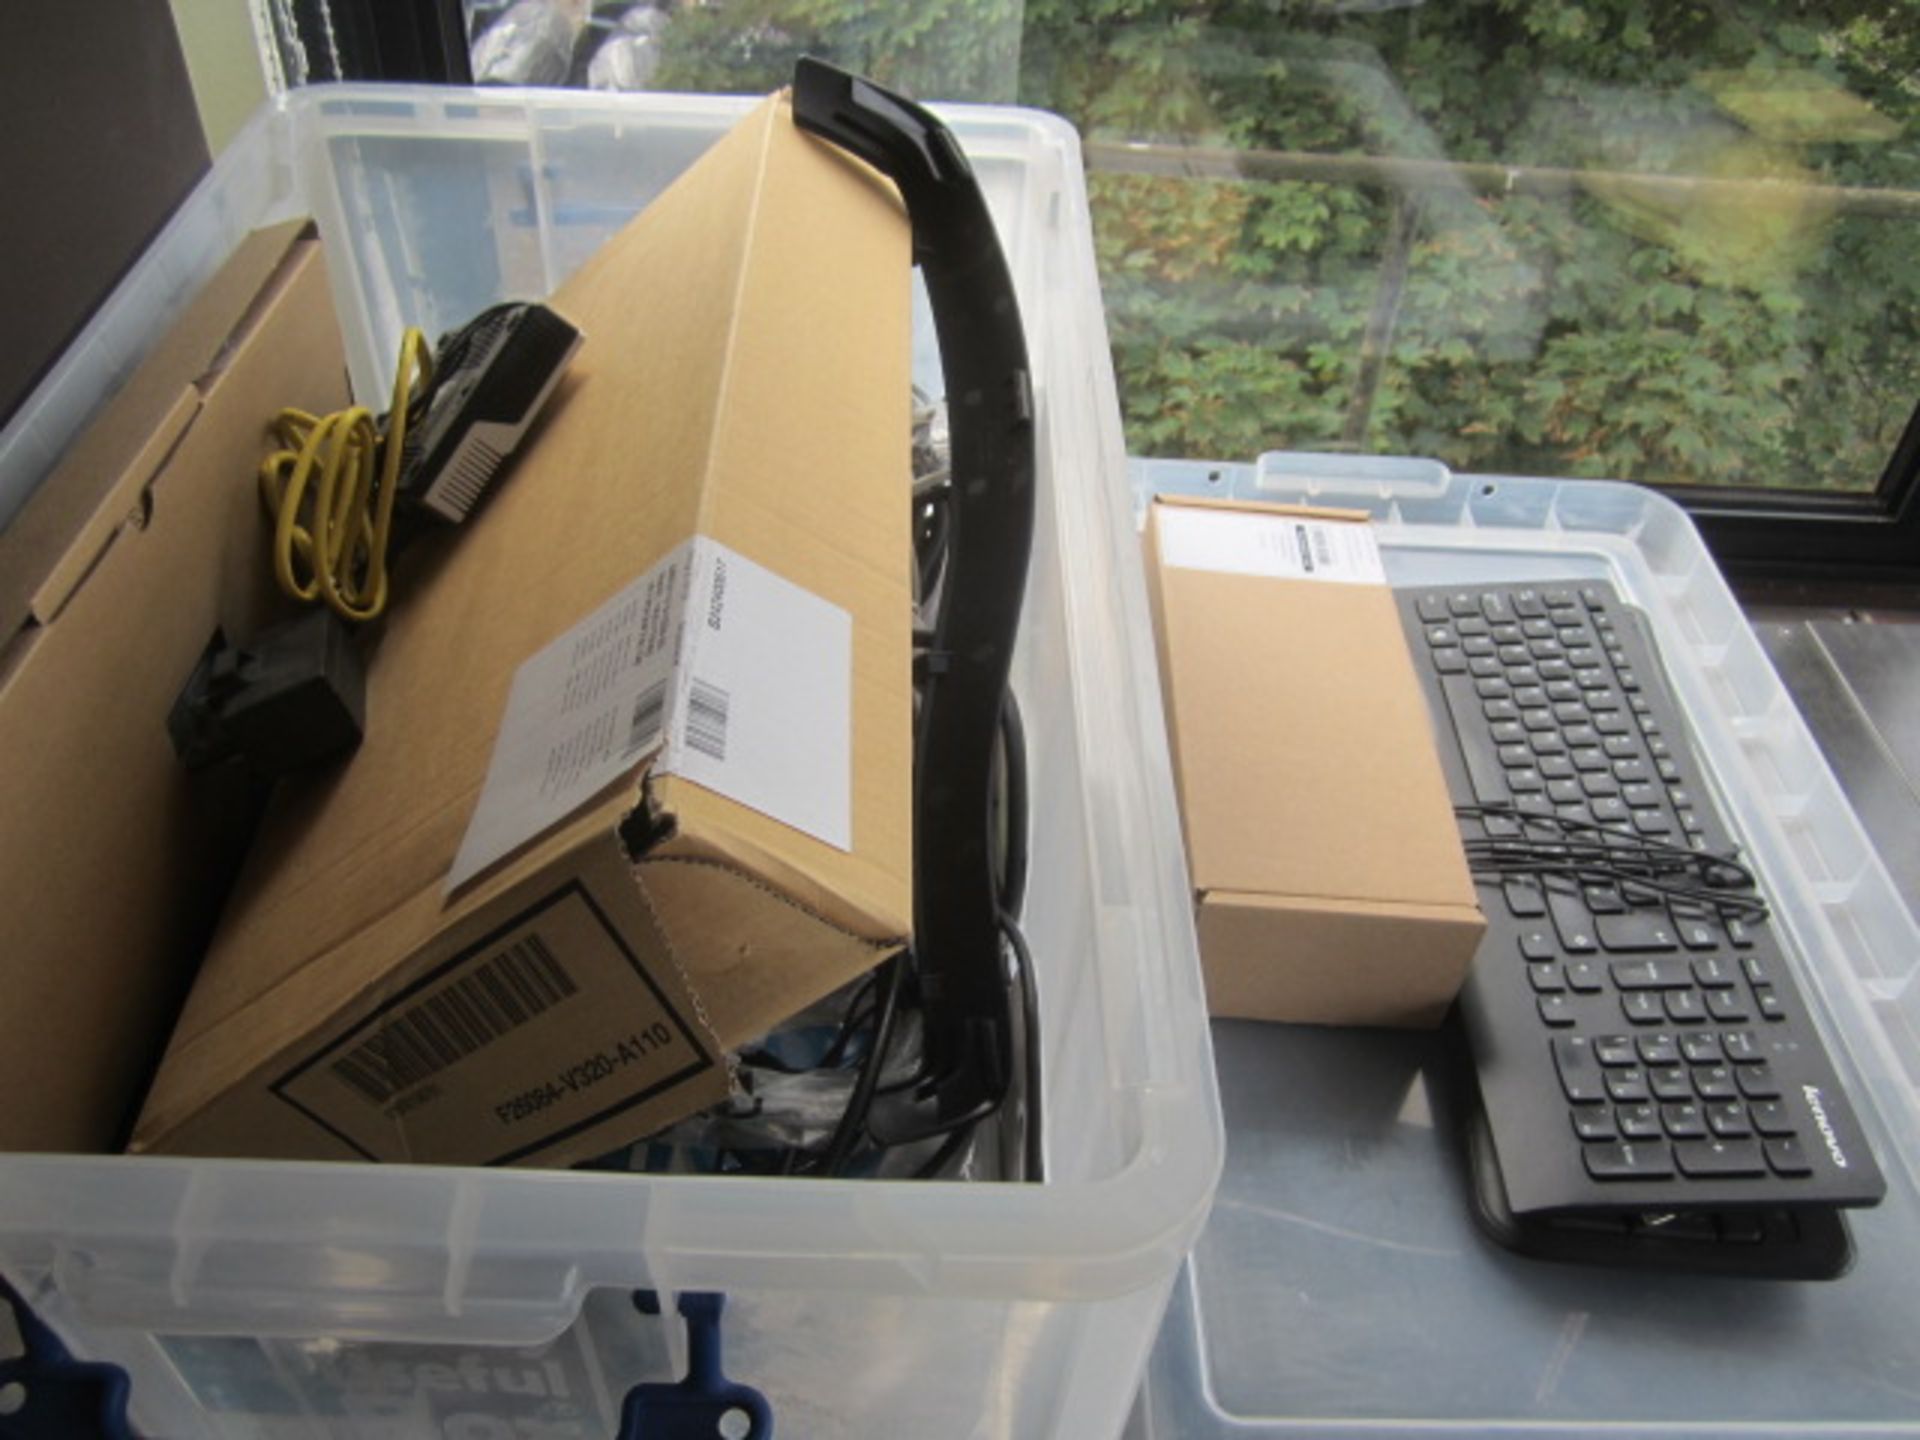 Quantity of various IT including keyboards, mice, computer cables etc.